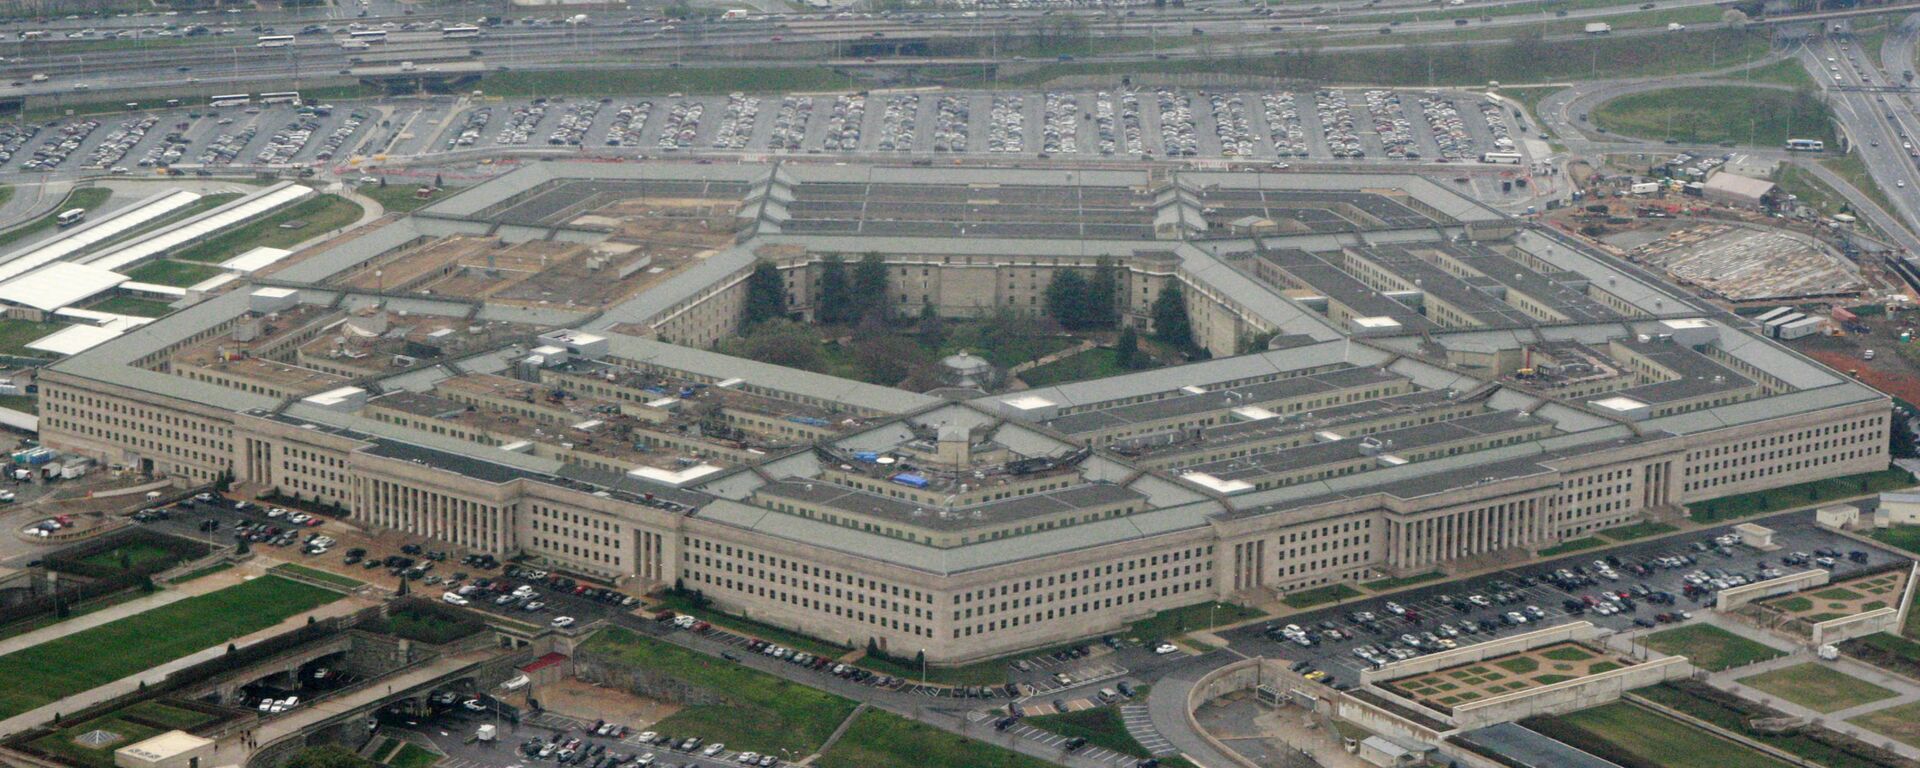 This March 27, 2008, file photo, shows the Pentagon in Washington. The Pentagon said Tuesday, July 6, 2021, that it is canceling a cloud-computing contract with Microsoft that could eventually have been worth $10 billion and will instead pursue a deal with both Microsoft and Amazon. (AP Photo/Charles Dharapak, File) - Sputnik International, 1920, 06.07.2021